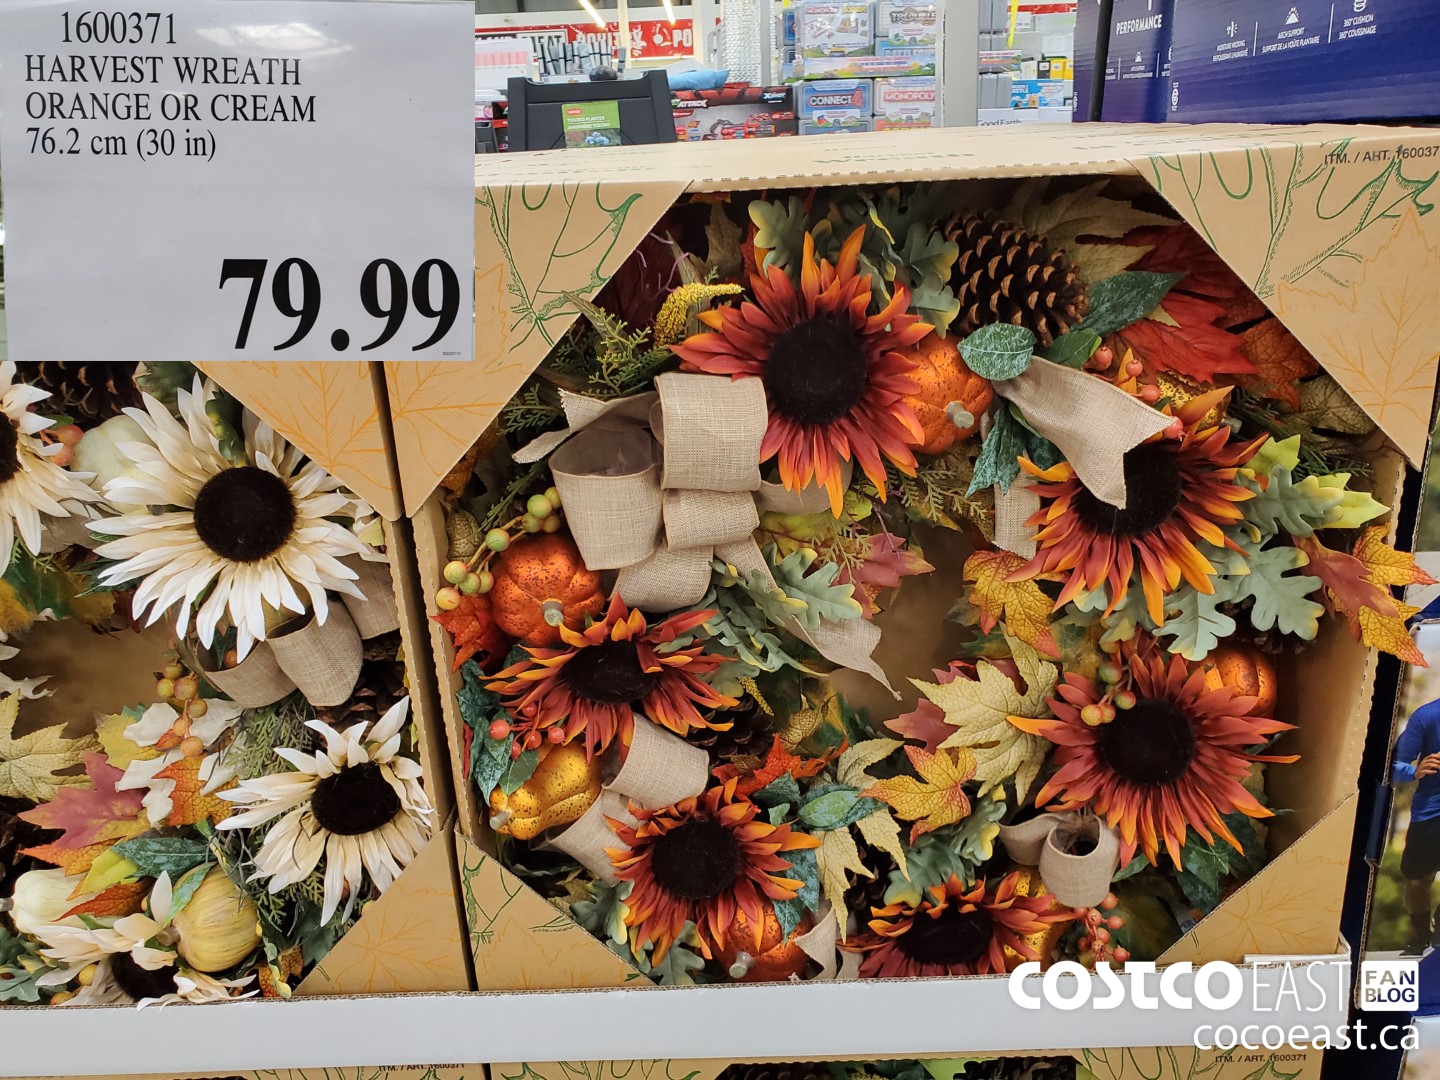 Costco Fall 2022 Superpost – The Entire Clothing Section